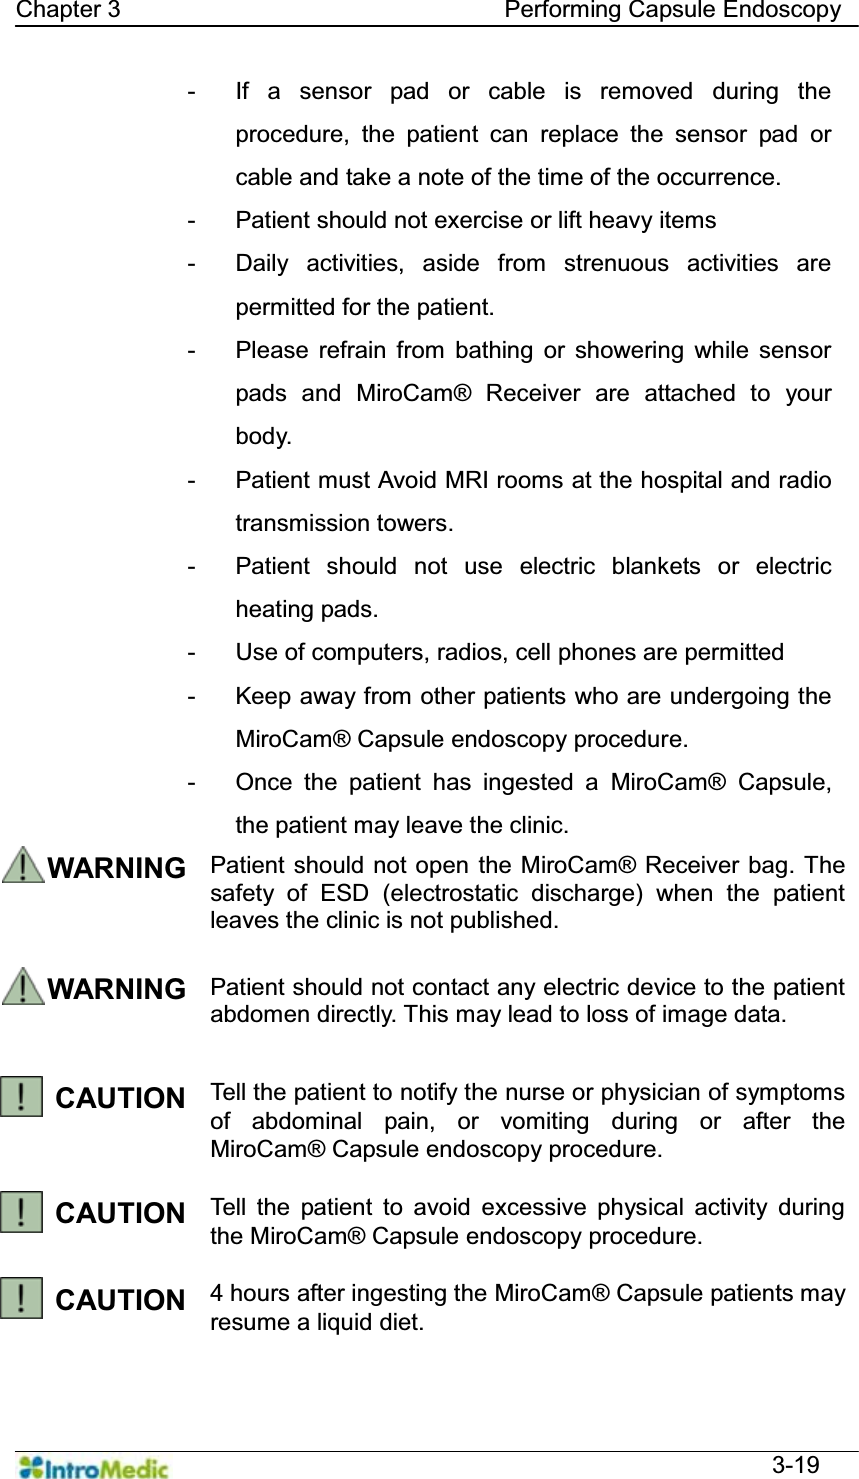   Chapter 3                                Performing Capsule Endoscopy  3-19 -  If a sensor pad or cable is removed during the procedure, the patient can replace the sensor pad or cable and take a note of the time of the occurrence.   -  Patient should not exercise or lift heavy items - Daily activities, aside from strenuous activities are permitted for the patient.   -  Please refrain from bathing or showering while sensor pads and MiroCam® Receiver are attached to your body.  -  Patient must Avoid MRI rooms at the hospital and radio transmission towers.   -  Patient should not use electric blankets or electric heating pads. -  Use of computers, radios, cell phones are permitted -  Keep away from other patients who are undergoing the MiroCam® Capsule endoscopy procedure. -  Once the patient has ingested a MiroCam® Capsule, the patient may leave the clinic. WARNING Patient should not open the MiroCam® Receiver bag. The safety of ESD (electrostatic discharge) when the patient leaves the clinic is not published.  WARNING Patient should not contact any electric device to the patient abdomen directly. This may lead to loss of image data.    CAUTION  Tell the patient to notify the nurse or physician of symptoms of abdominal pain, or vomiting during or after the MiroCam® Capsule endoscopy procedure.  CAUTION  Tell the patient to avoid excessive physical activity during the MiroCam® Capsule endoscopy procedure.  CAUTION  4 hours after ingesting the MiroCam® Capsule patients may resume a liquid diet.  